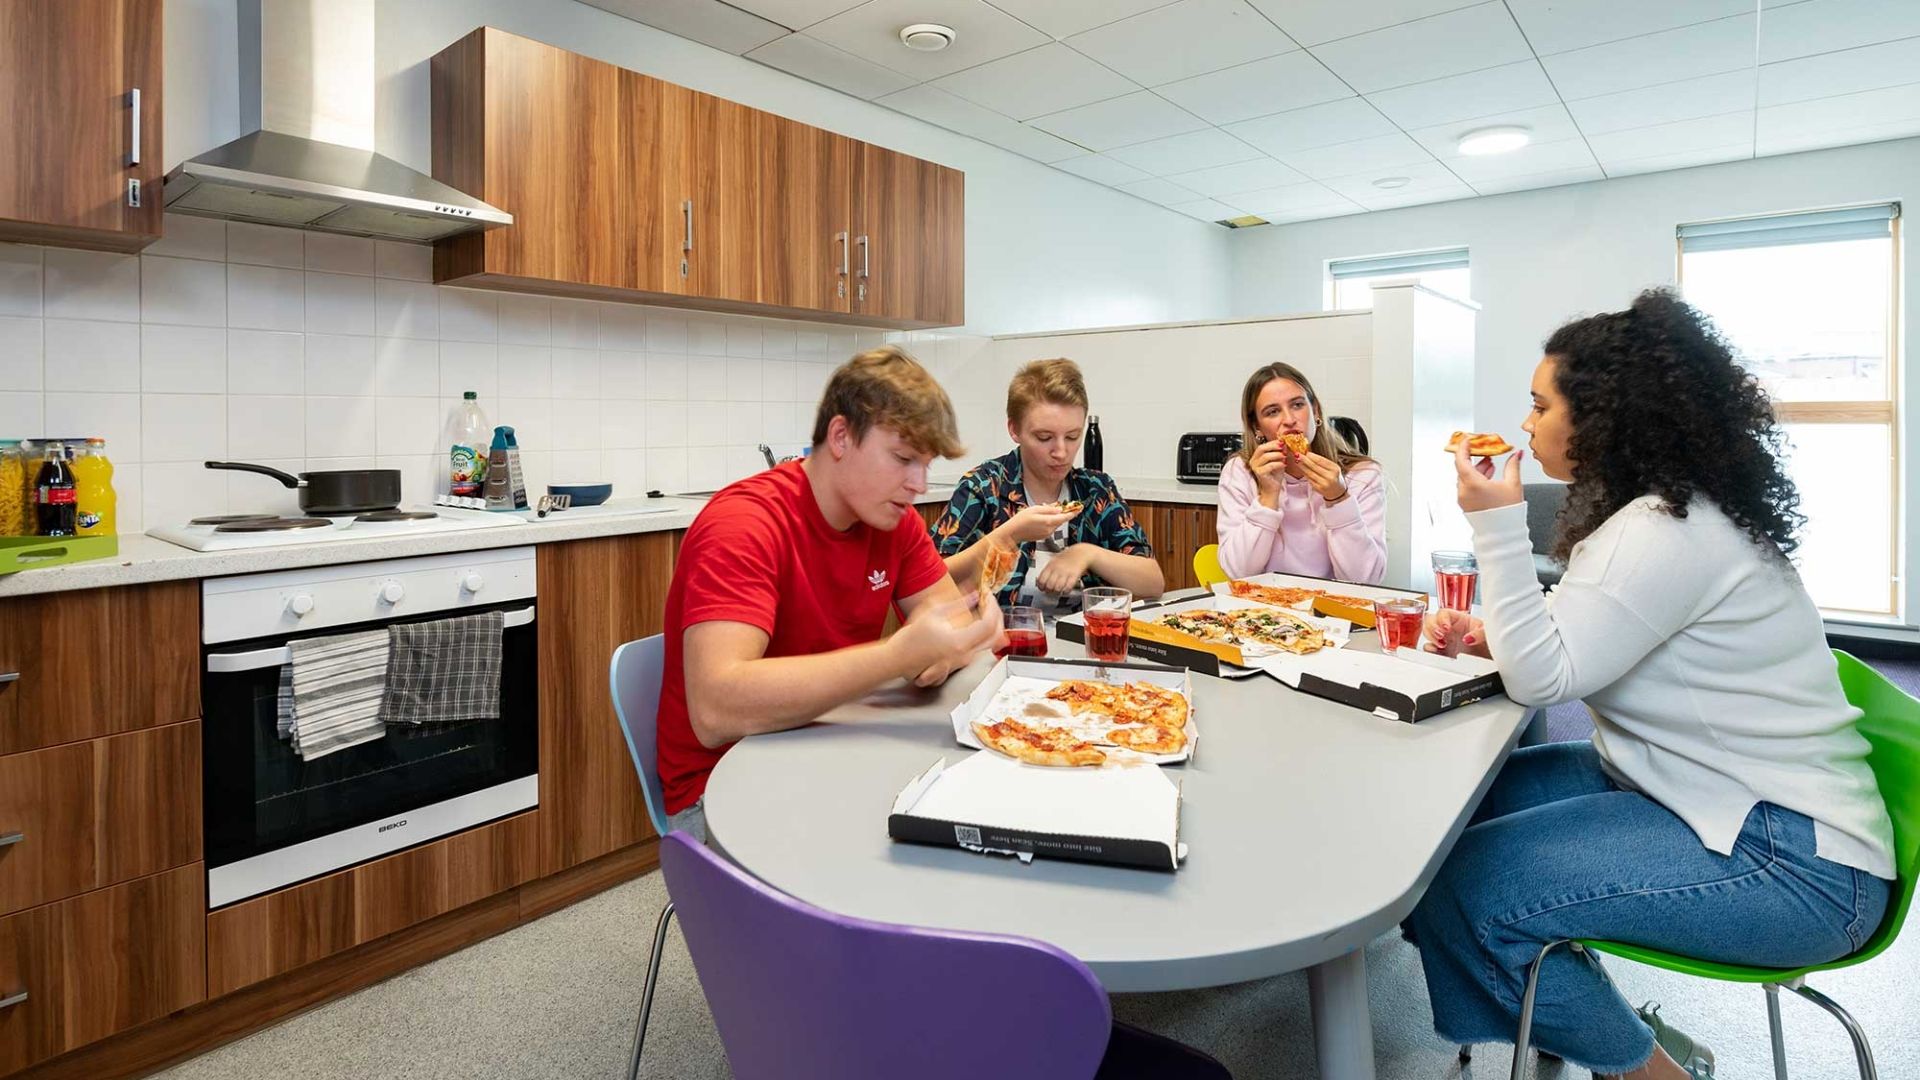 four students eating pizza at a kitchen table in Windsor House accommodation